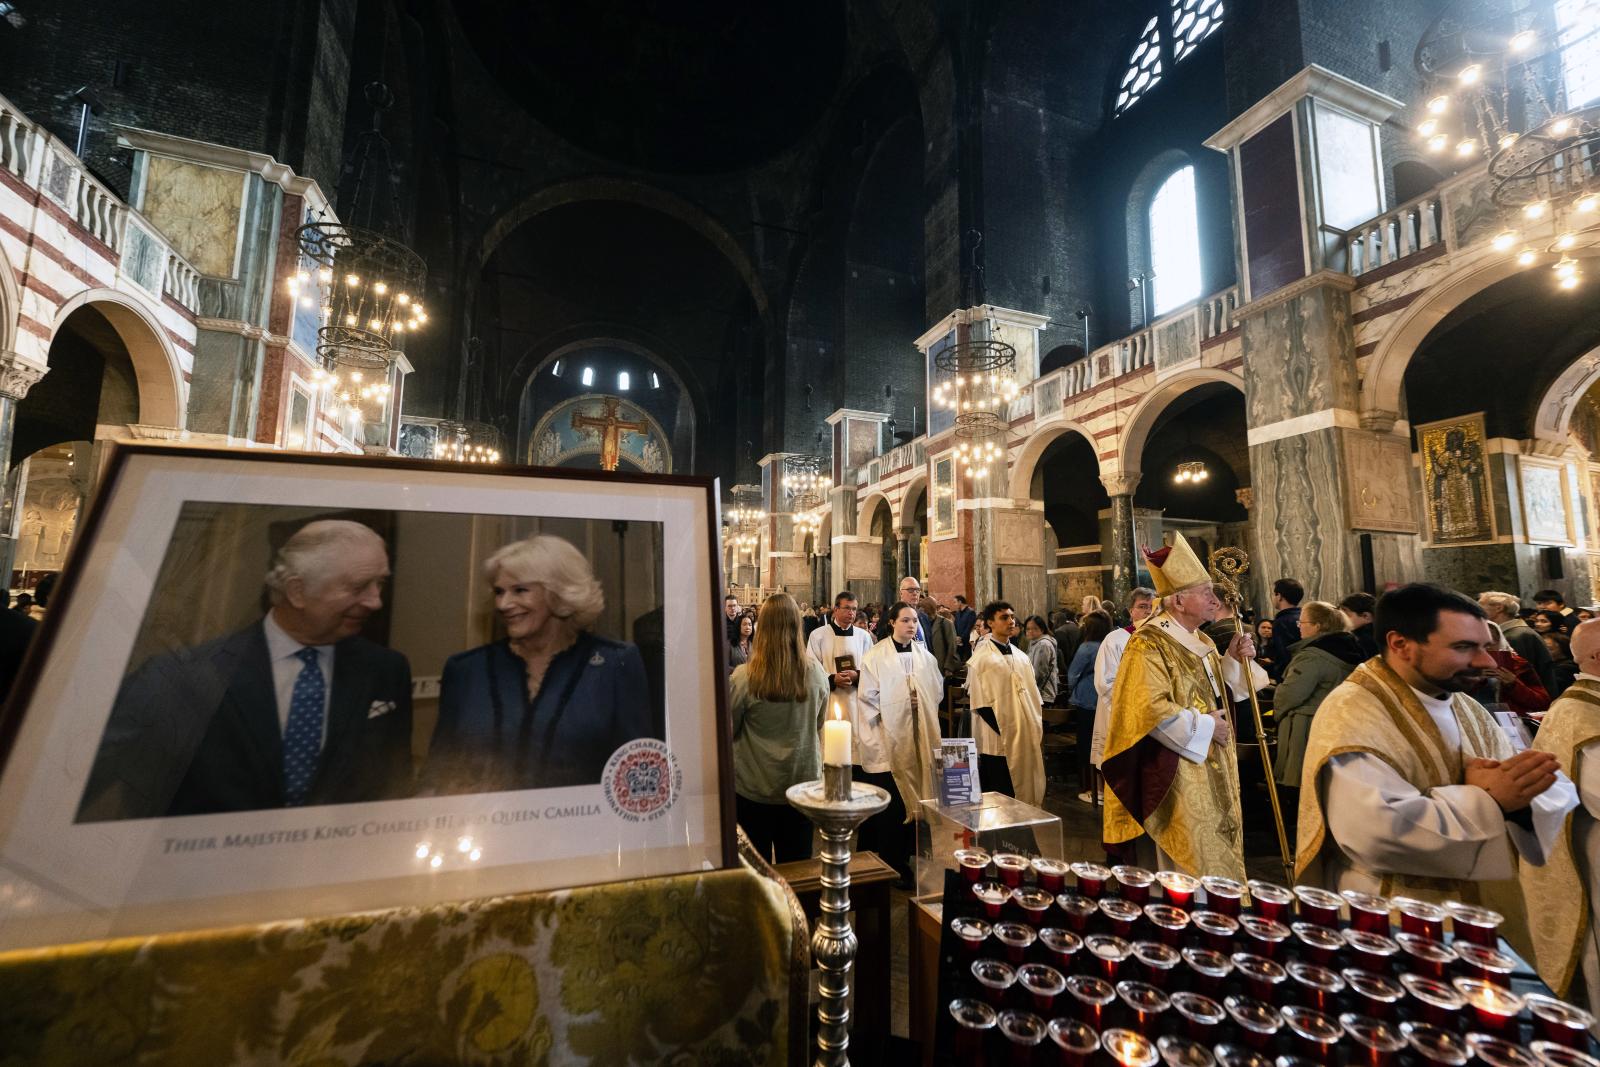 Cardinal's Homily for Mass celebrated for King Charles III - Diocese of Westminster